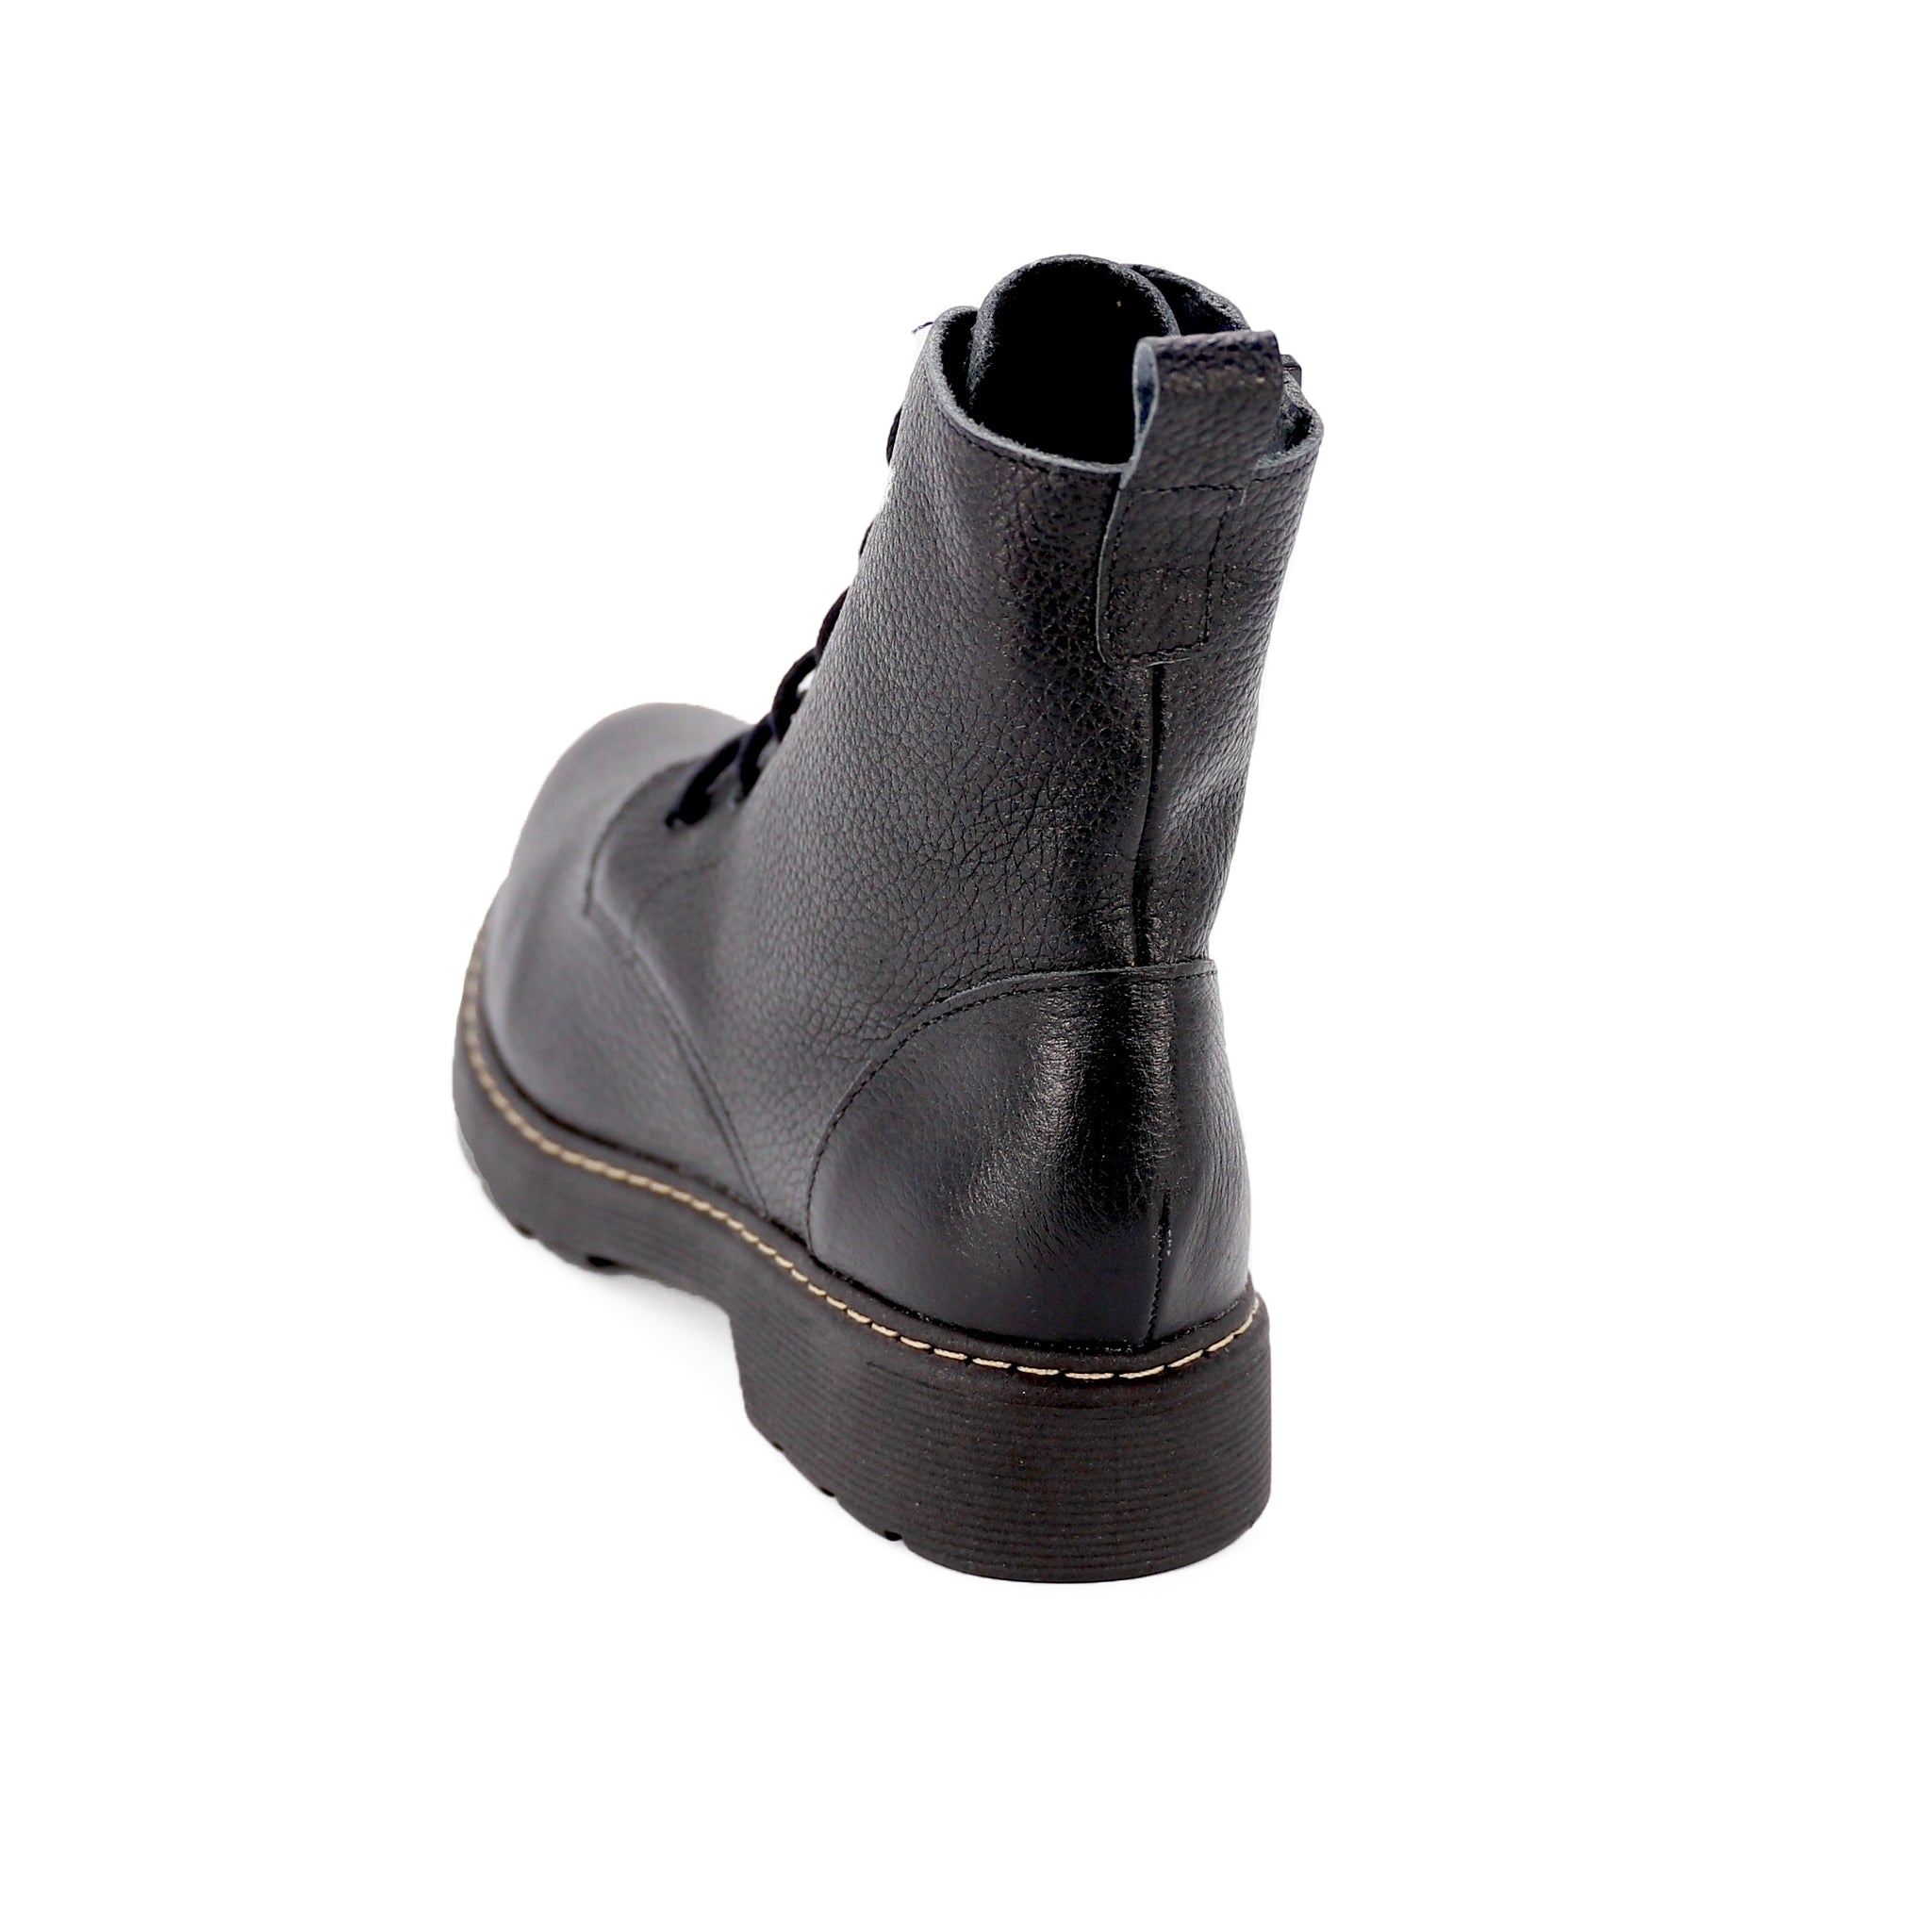 womens leather shoe boots